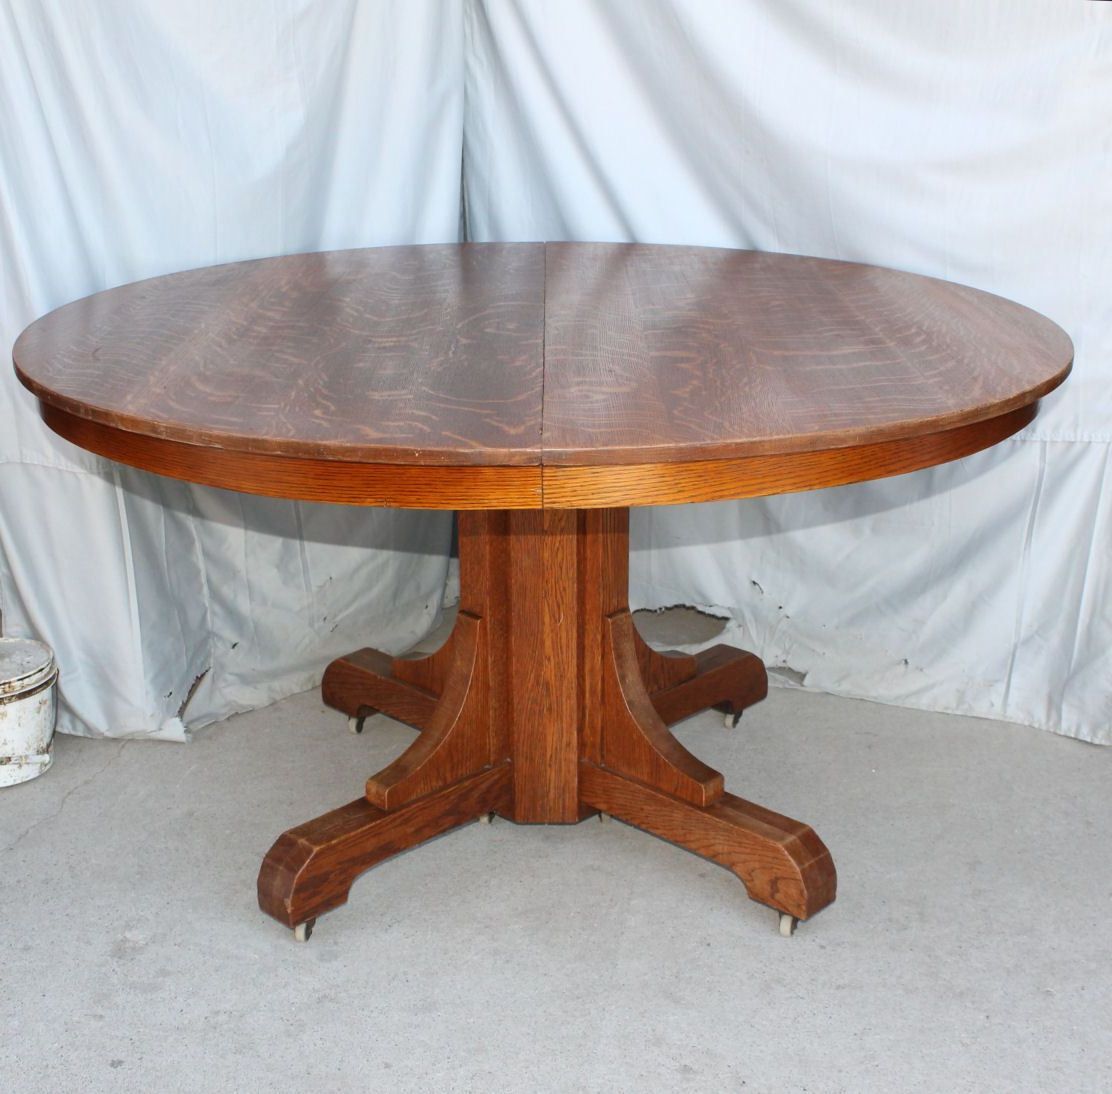 Wood Kitchen Dining Tables With Removable Center Leaf For Favorite Details About Antique Mission Oak Dining Round Table Gustav (View 7 of 25)